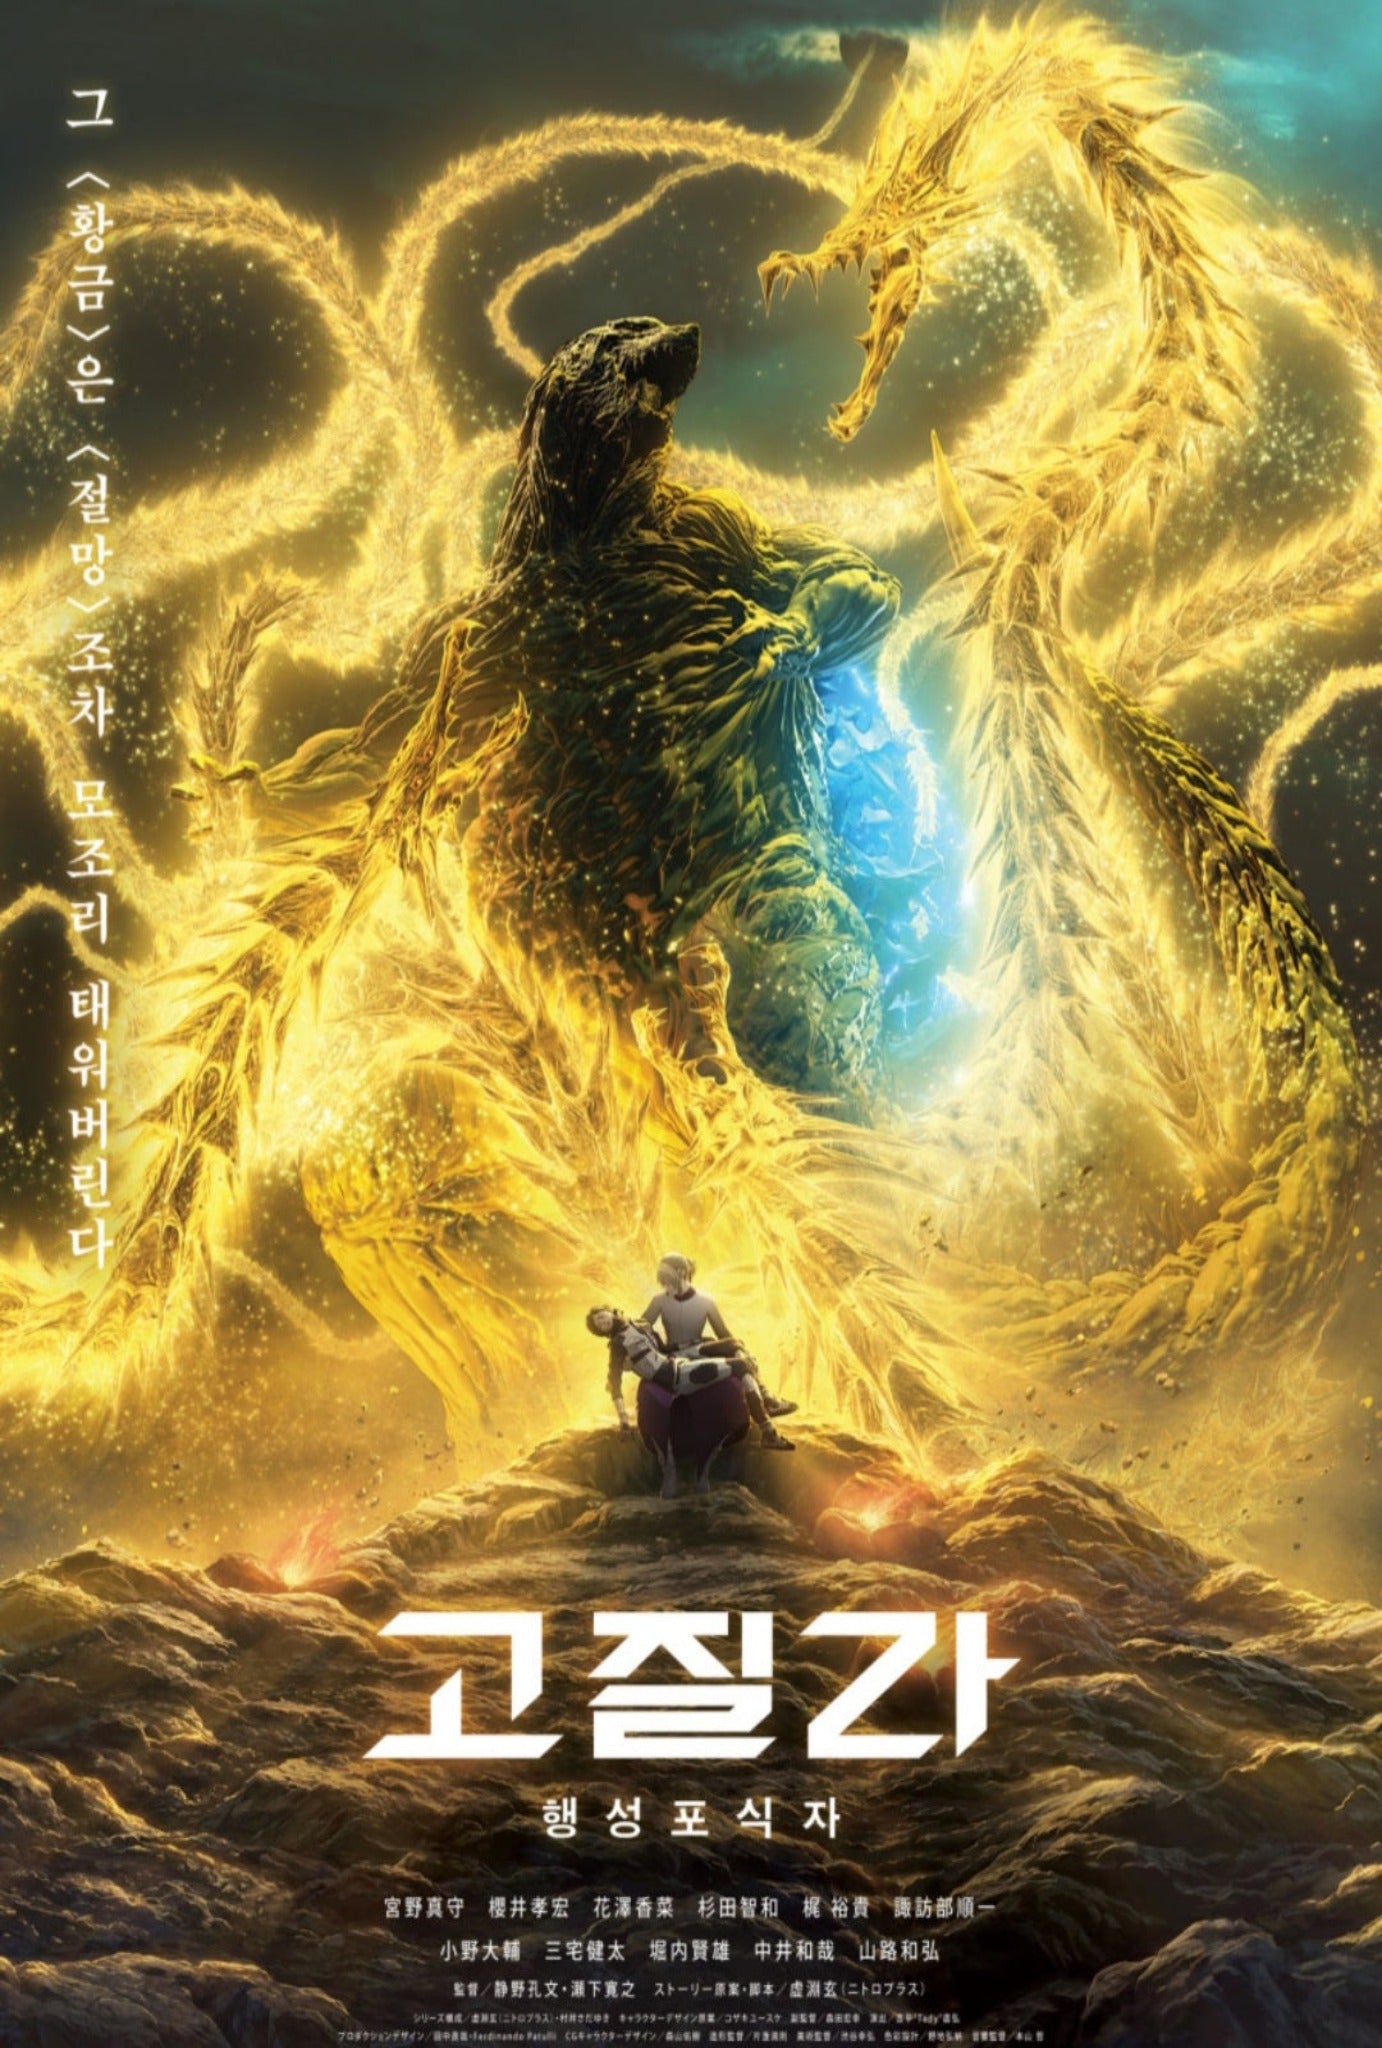 Godzilla The Planet Eater 2018 | Sci-fi | Action | 1h 31m | 62% liked this film Google users | 1080p MP4 | Digital Download